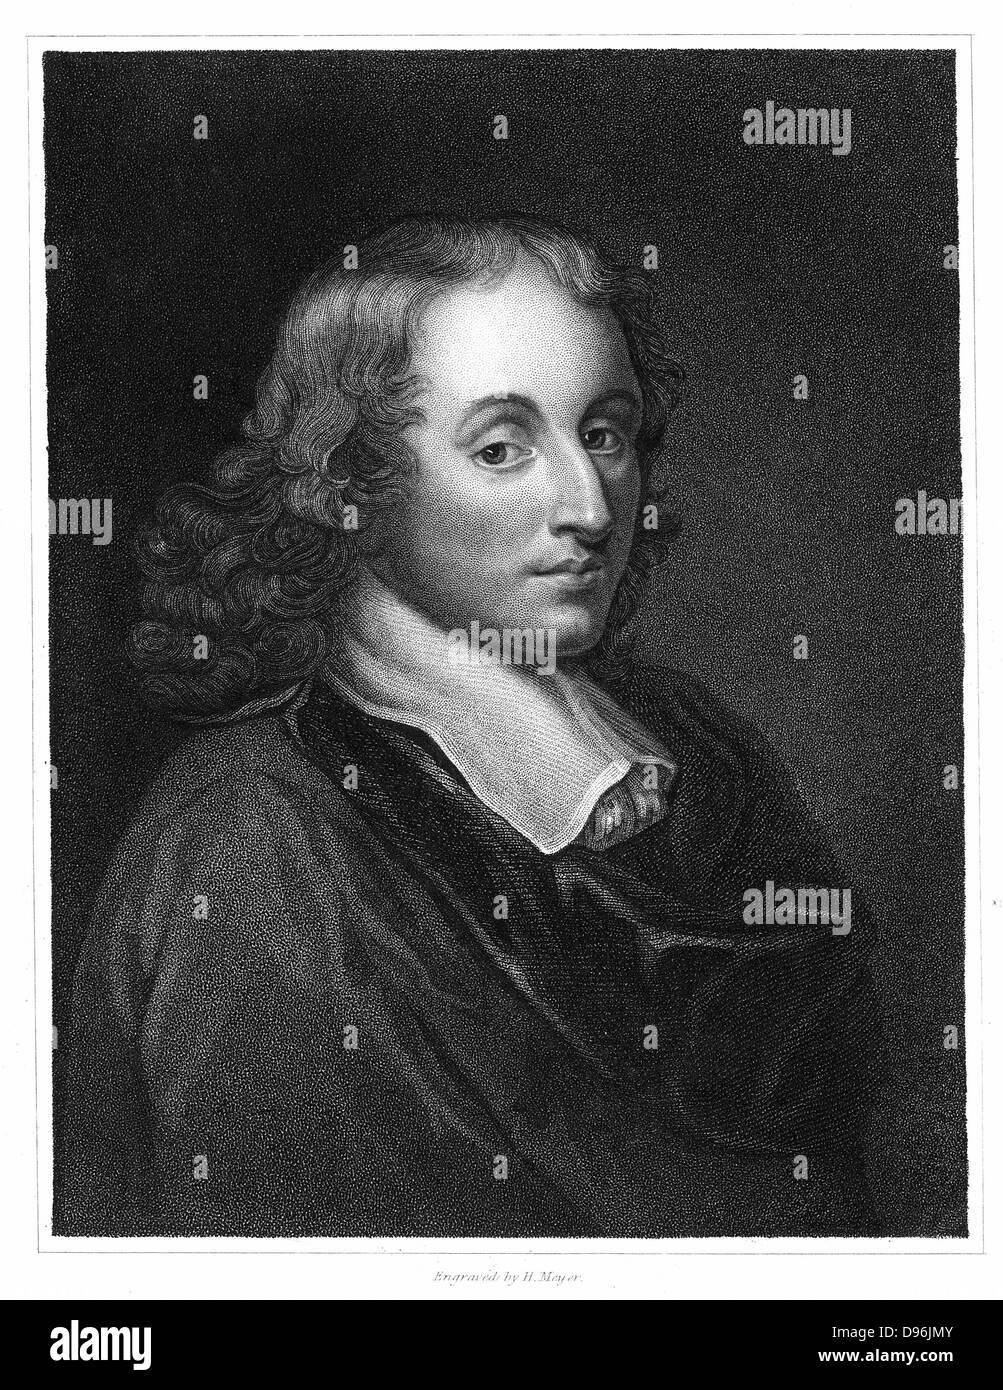 Blaise Pascal (1623-62) French philosopher, mathematician, physicist and theologian. Steel engraving c1830. Stock Photo